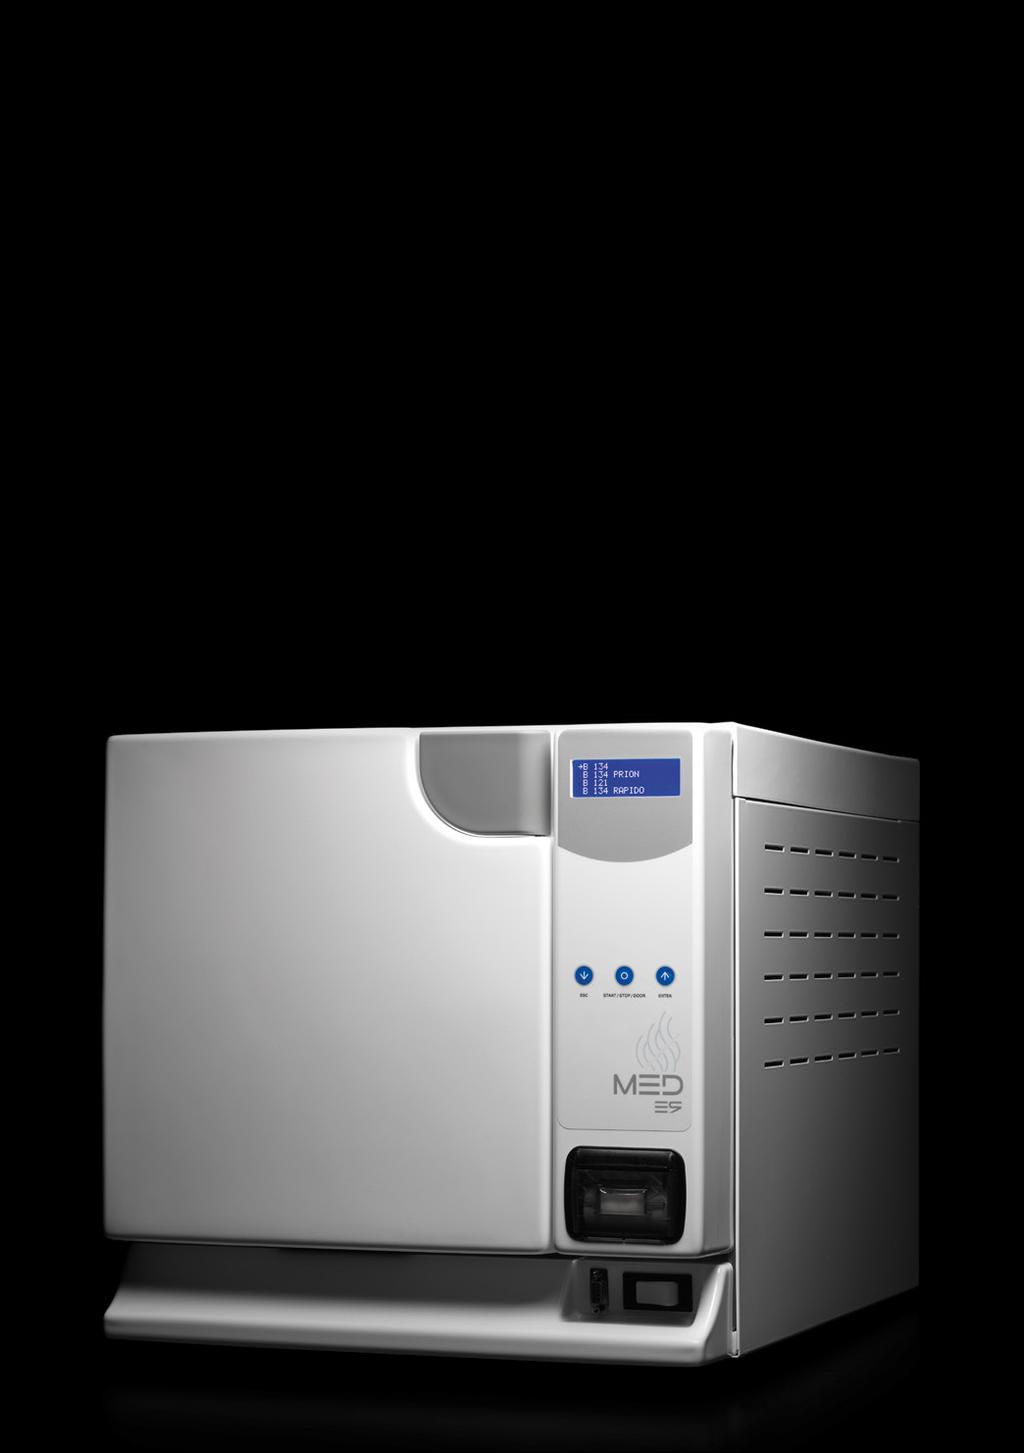 Eco-friendly Optimized electricity and water consumption (1400 W, 600 ml).